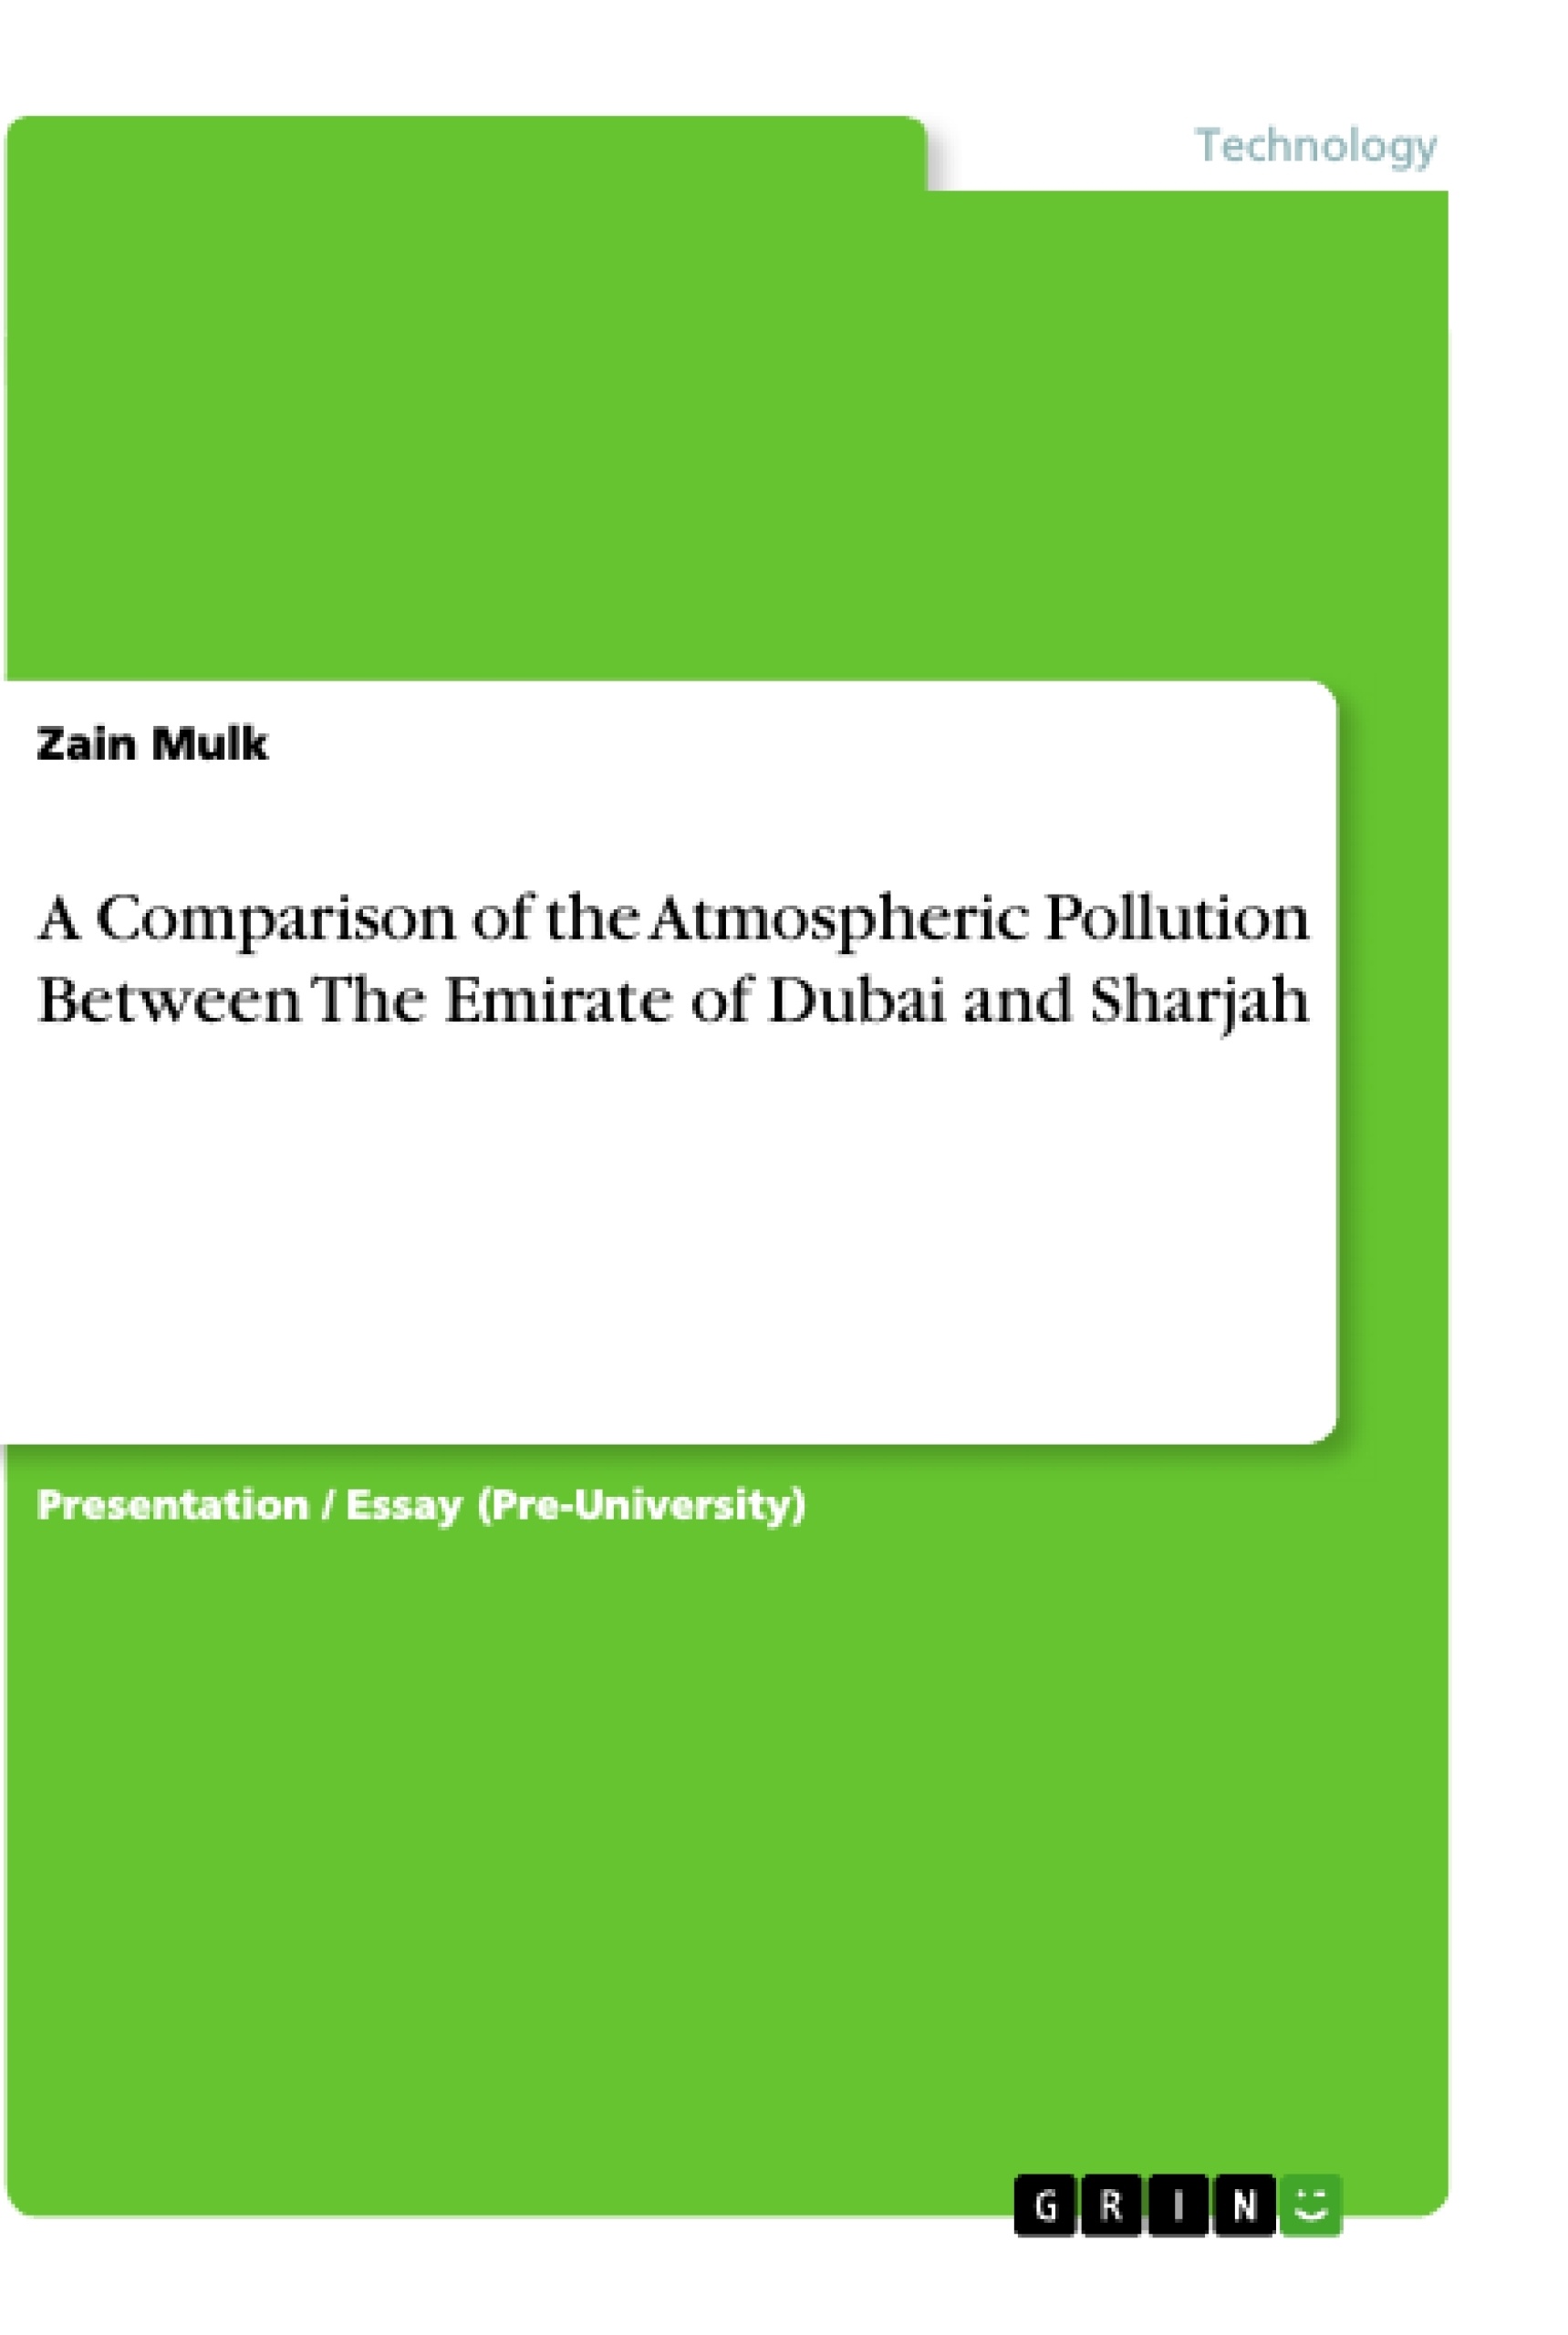 Titel: A Comparison of the Atmospheric Pollution Between The Emirate of Dubai and Sharjah